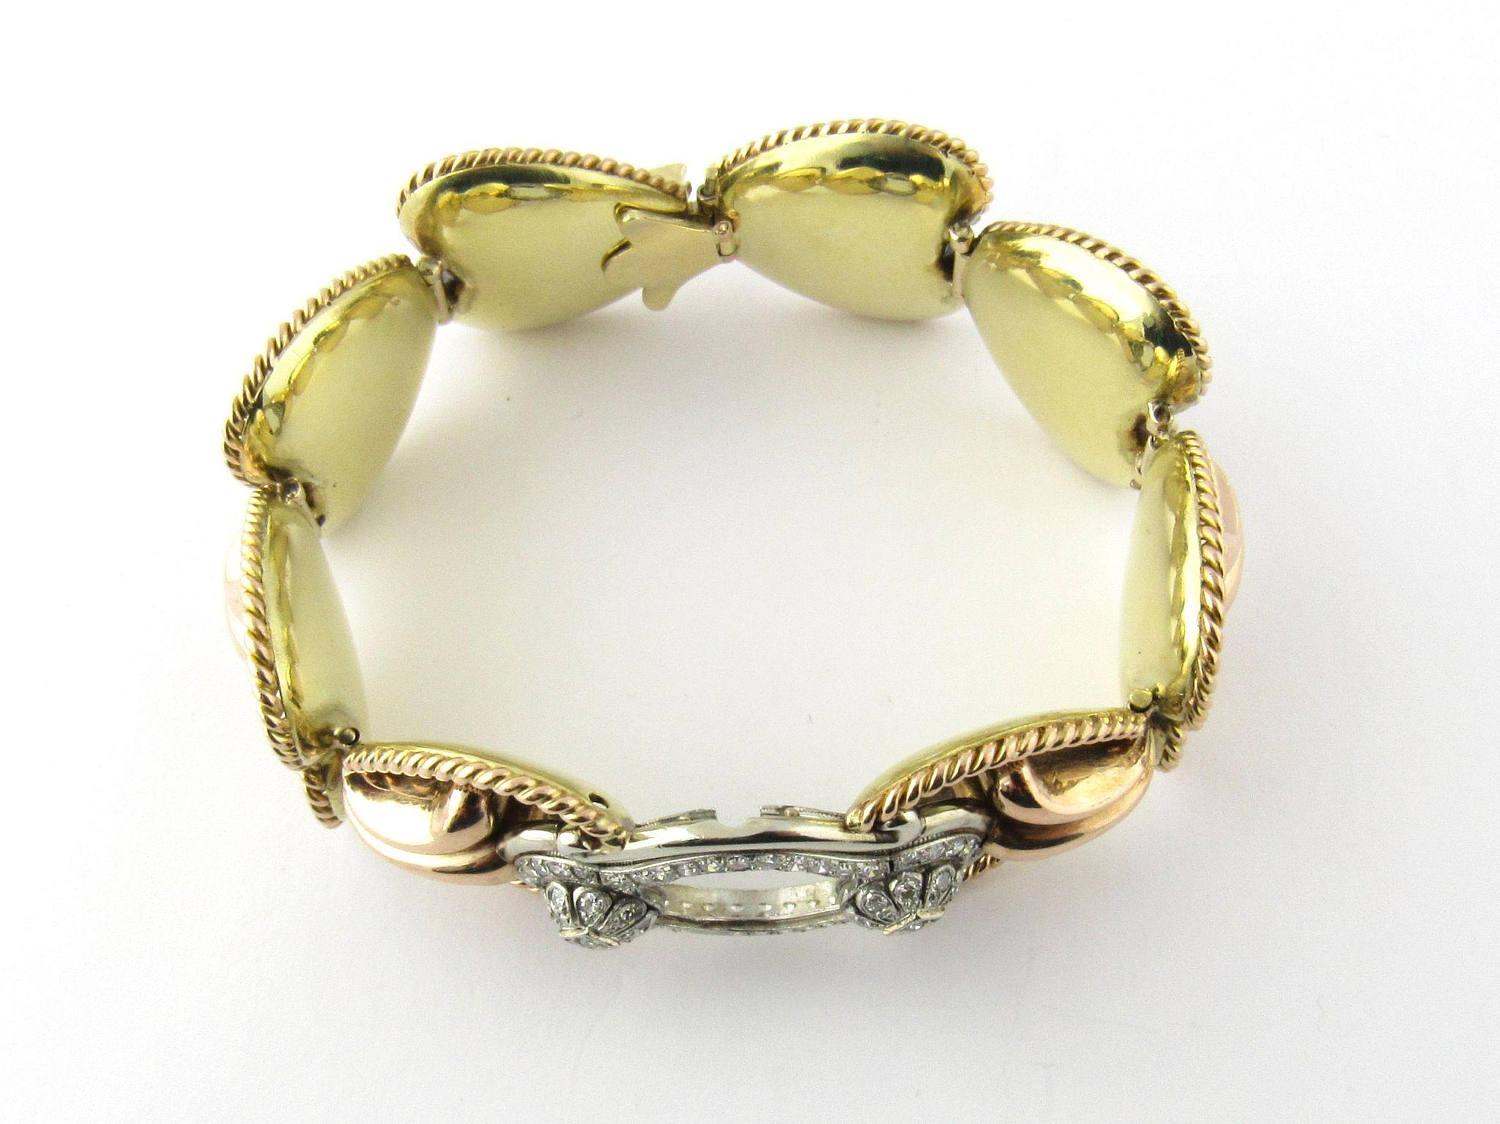 Antique 14 Karat Yellow Gold and Diamond Bracelet

This spectacular bracelet features 58 single cut diamonds in total; 40 weighing approximately .03 ct. each and 18 weighing approximately .02 ct. each. Color: H-I, Clarity: VS1-V2. Approximate